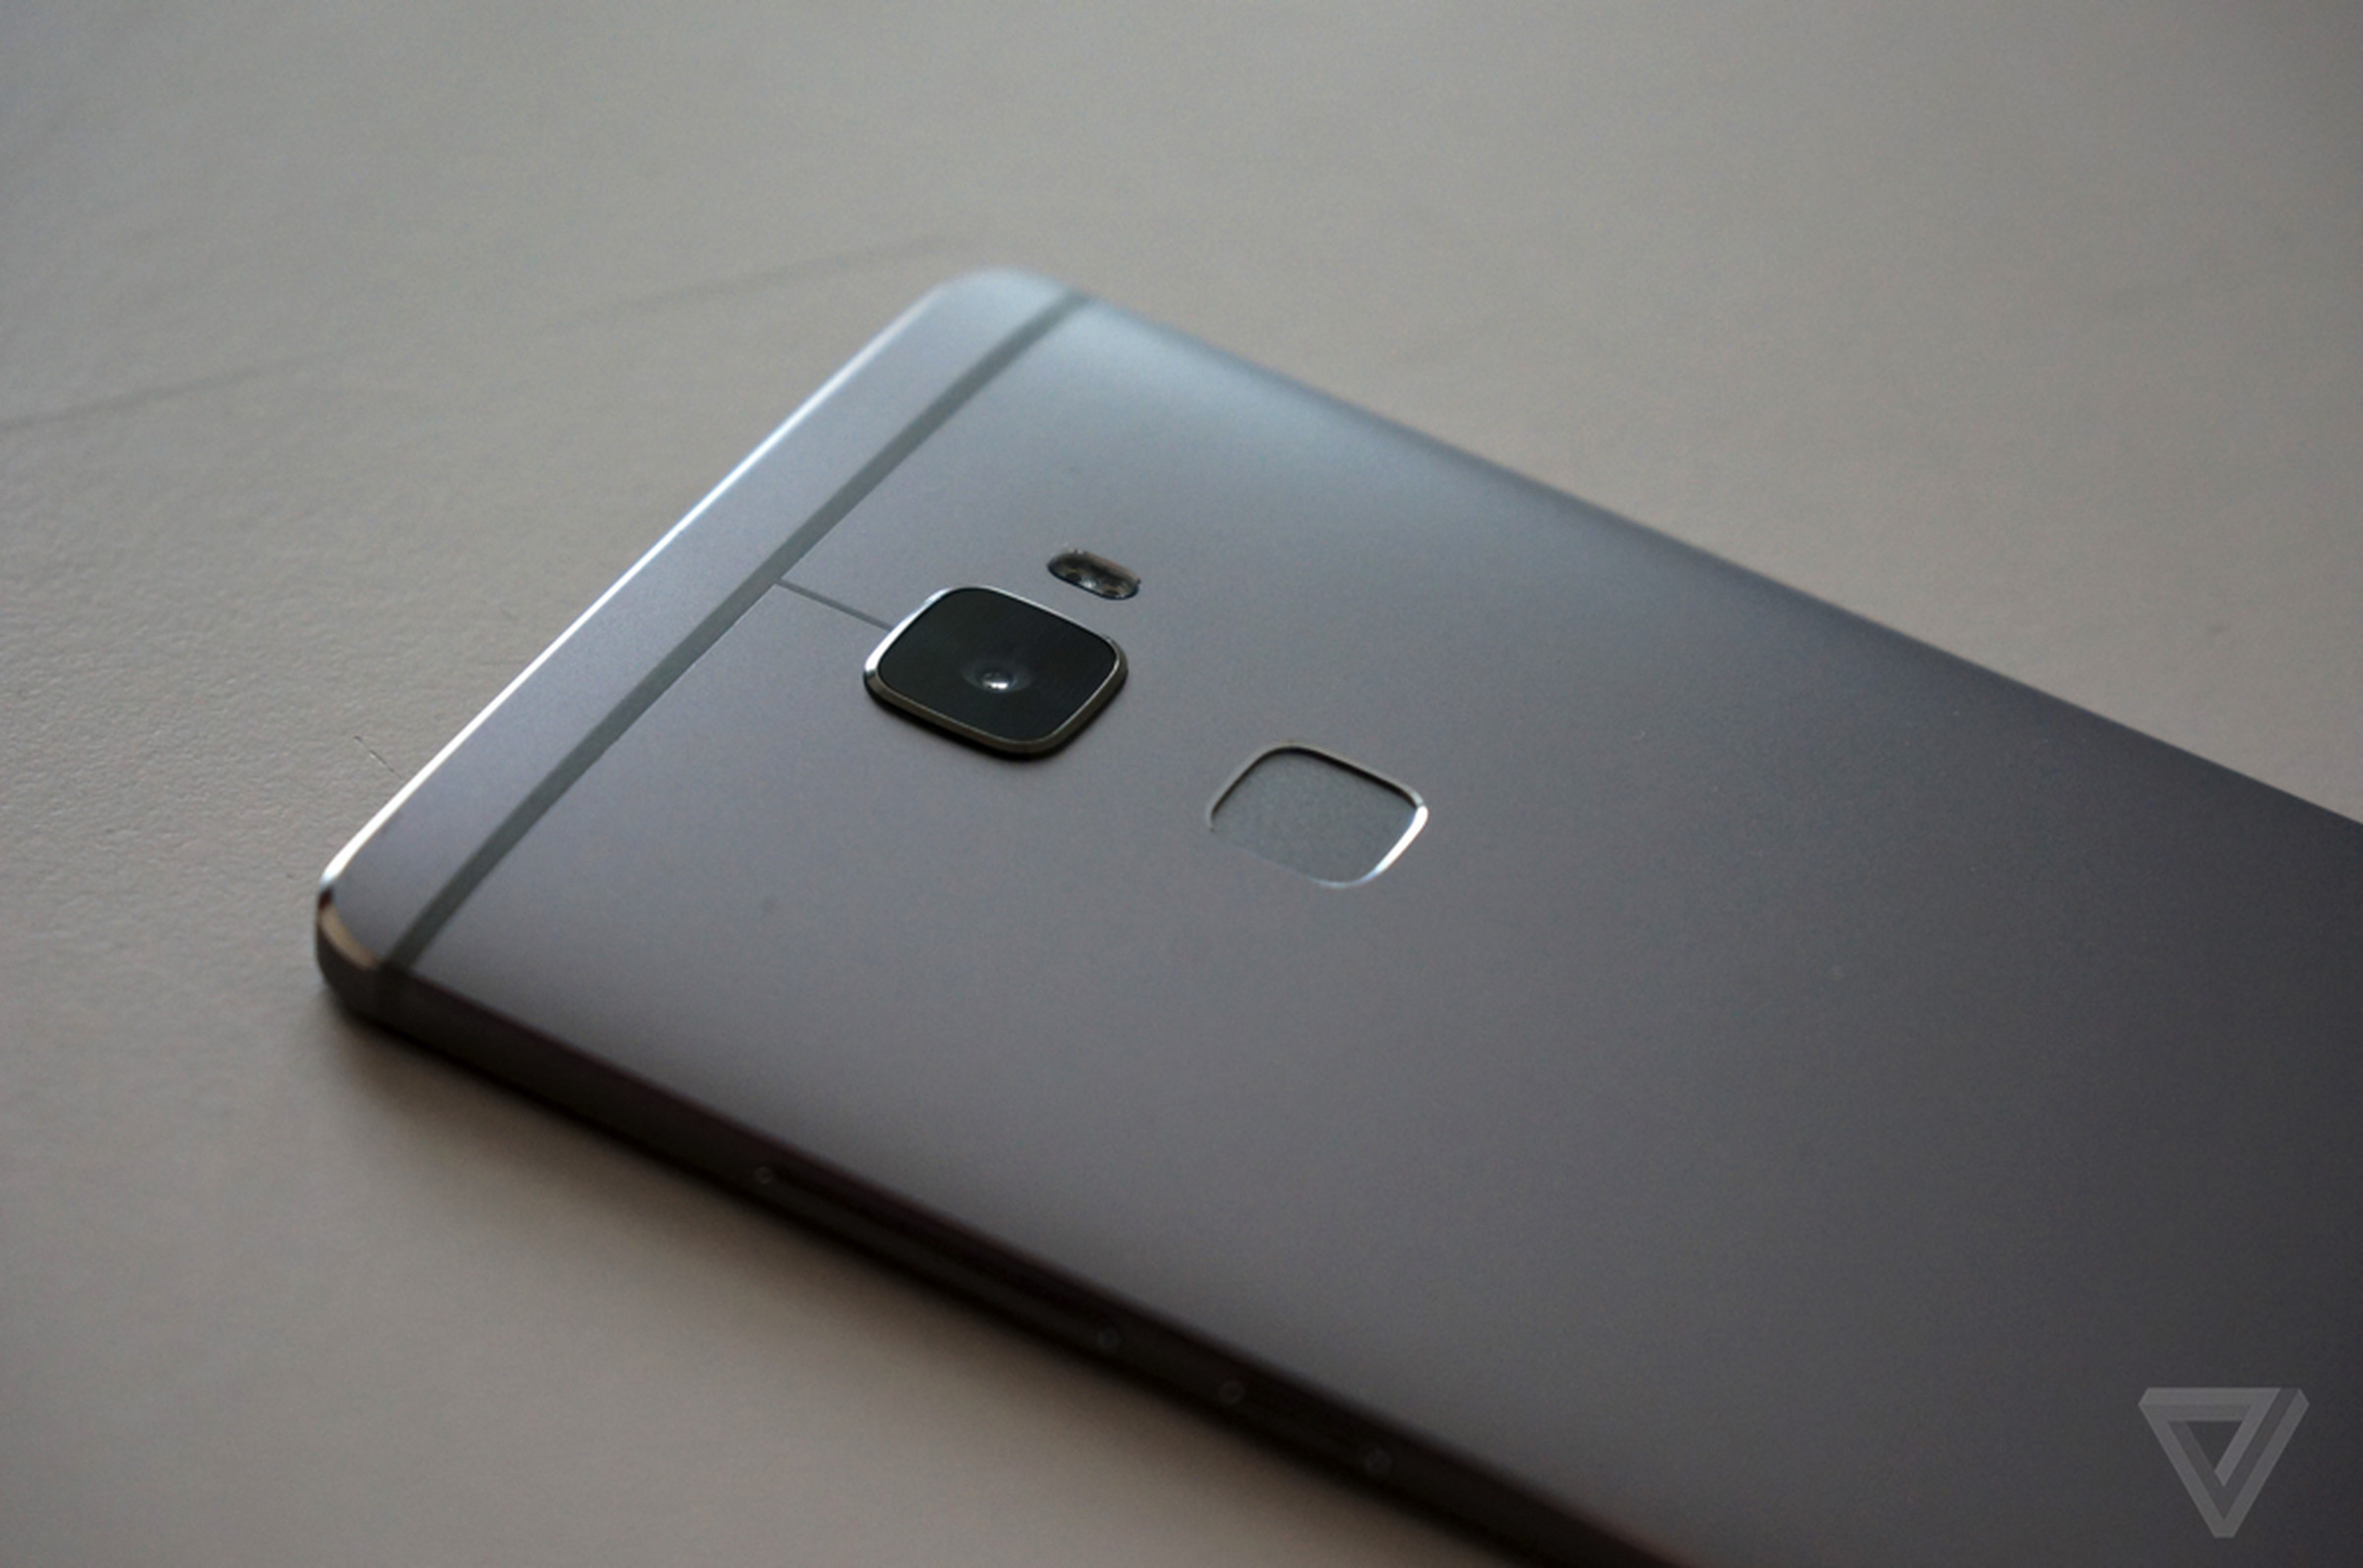 Huawei Mate S hands-on photos